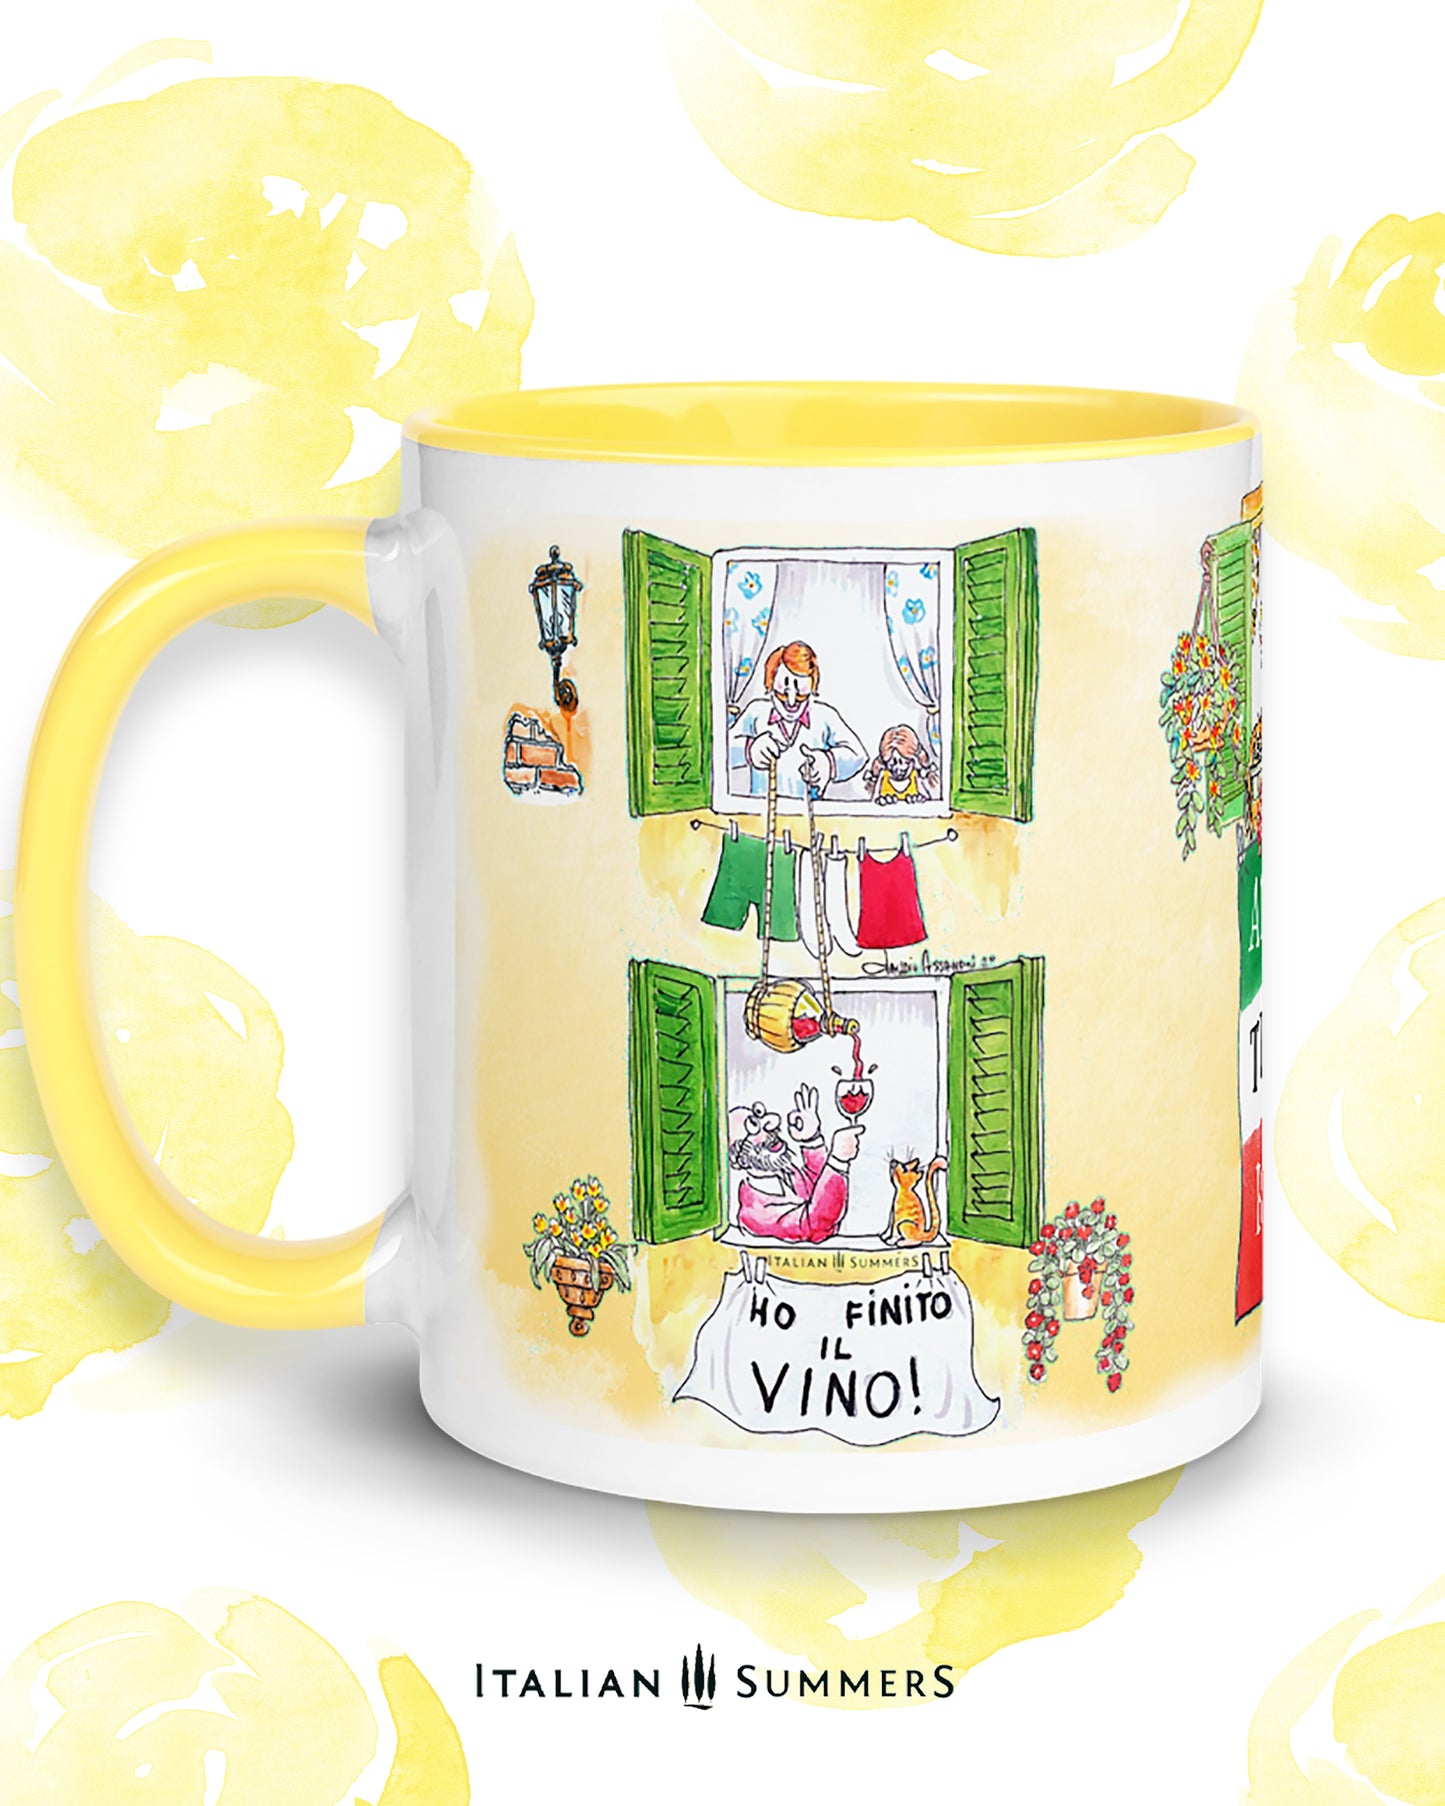 Italy inspired mug with sketches of Italian lifestyle. A sketch of two Italian windows where the downstairs neighbour is without vino. He holds the glas up,  out of the window and the upstairs neughbour lowers a flask of good Chinti wine to share some good cheer. Italian solidarity at play! :-) The mug has a yellow or red inside/handle. Made by Italian Summers